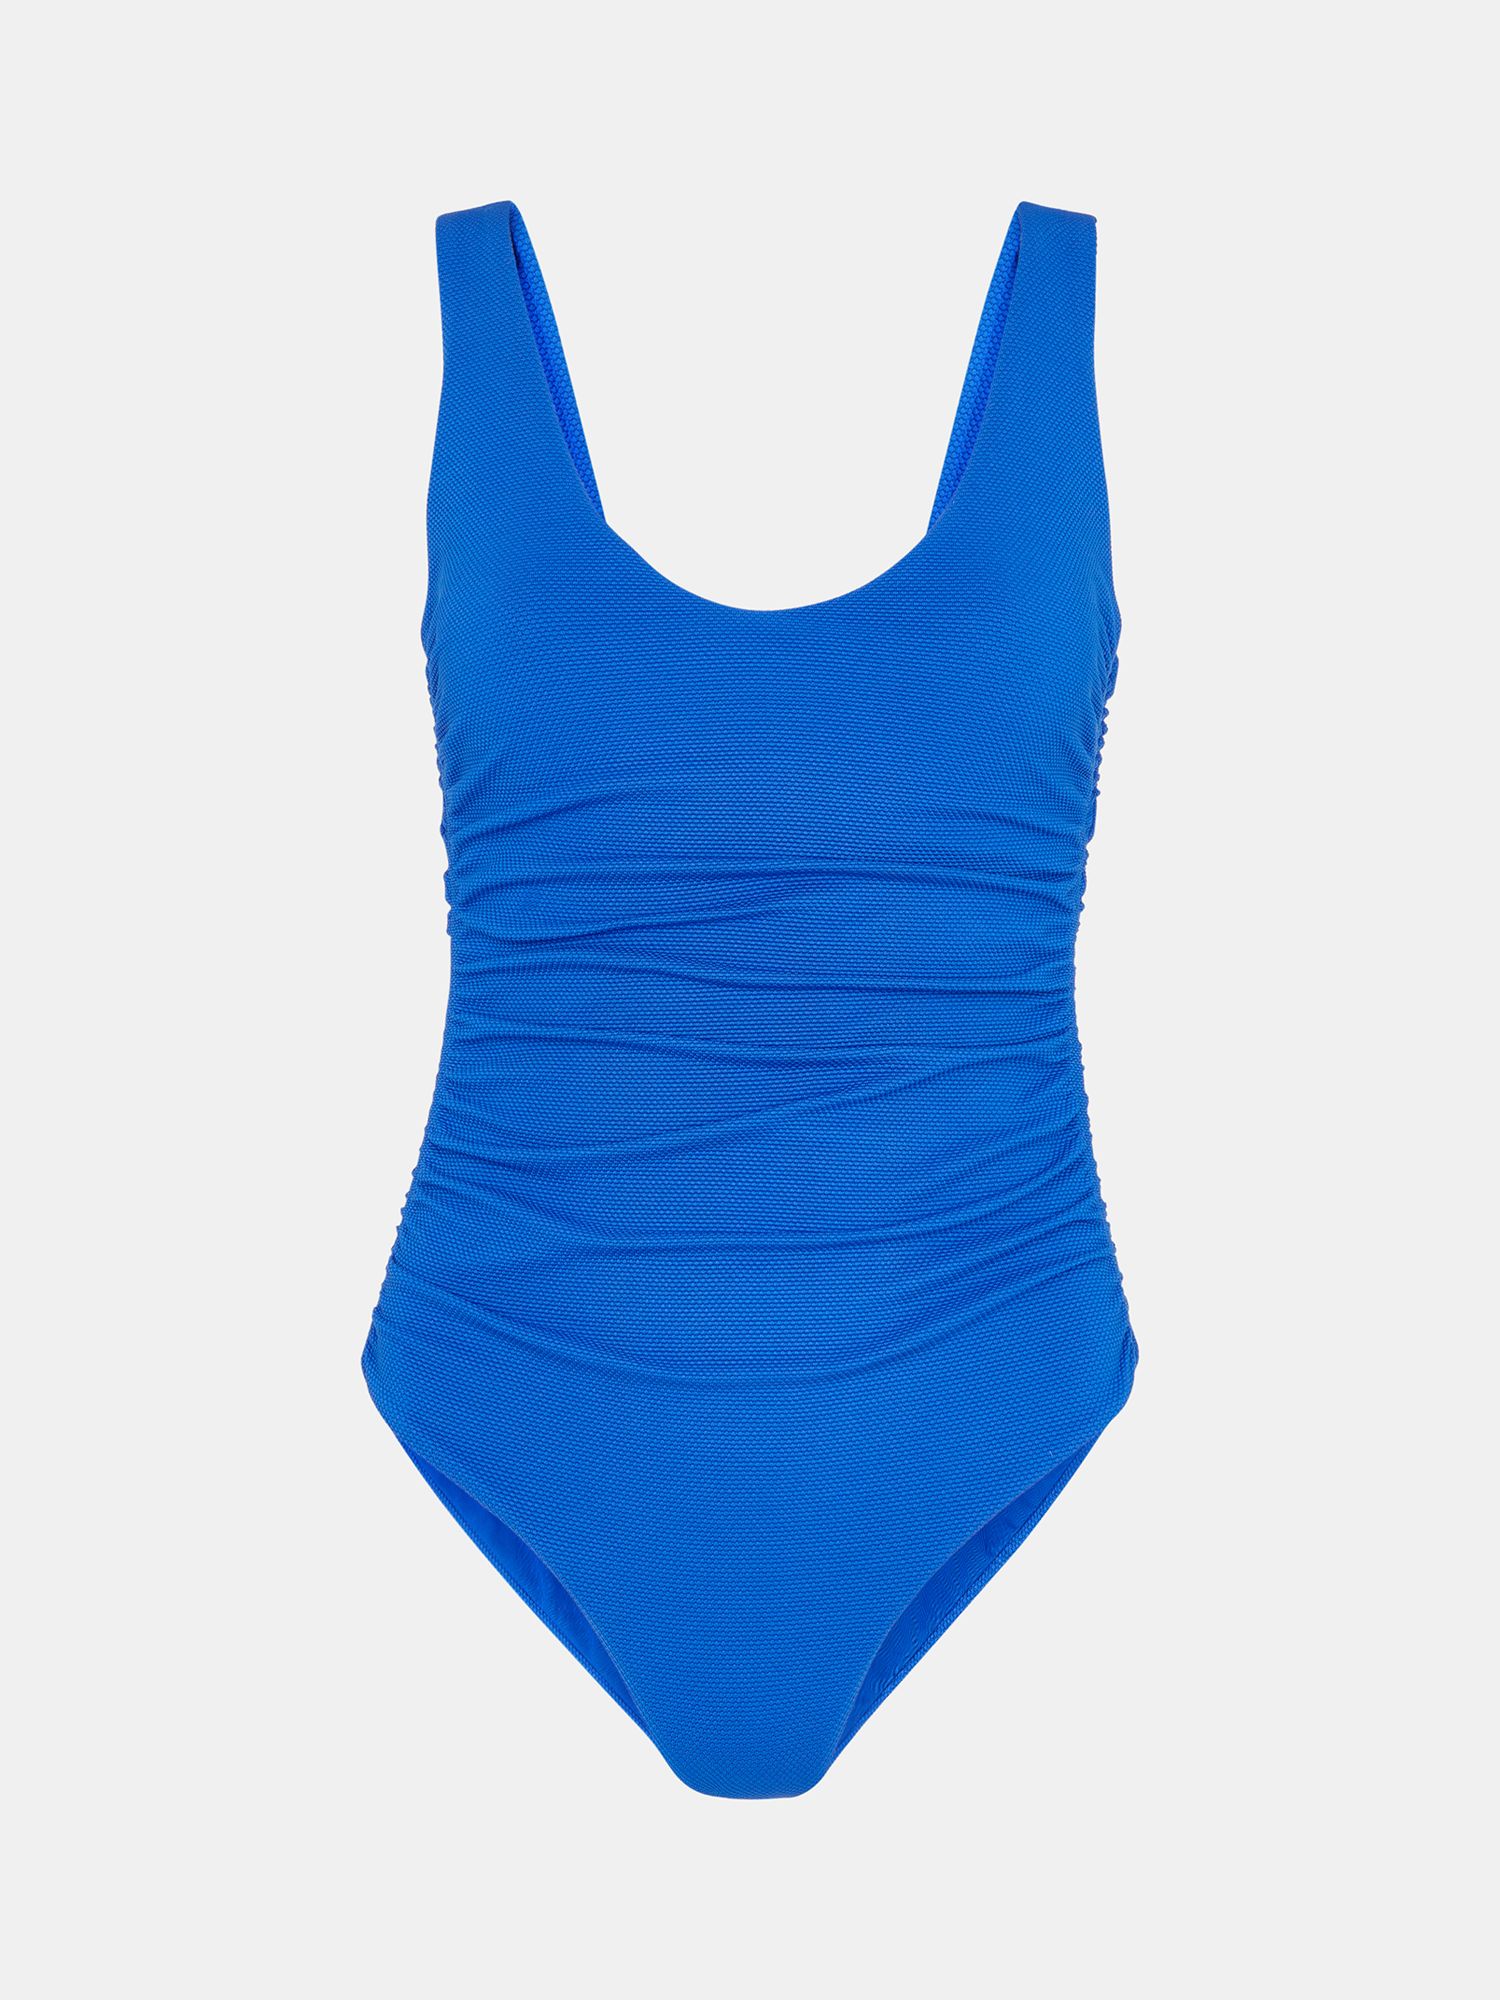 Whistles Textured Side Ruched Swimsuit, Blue, 6